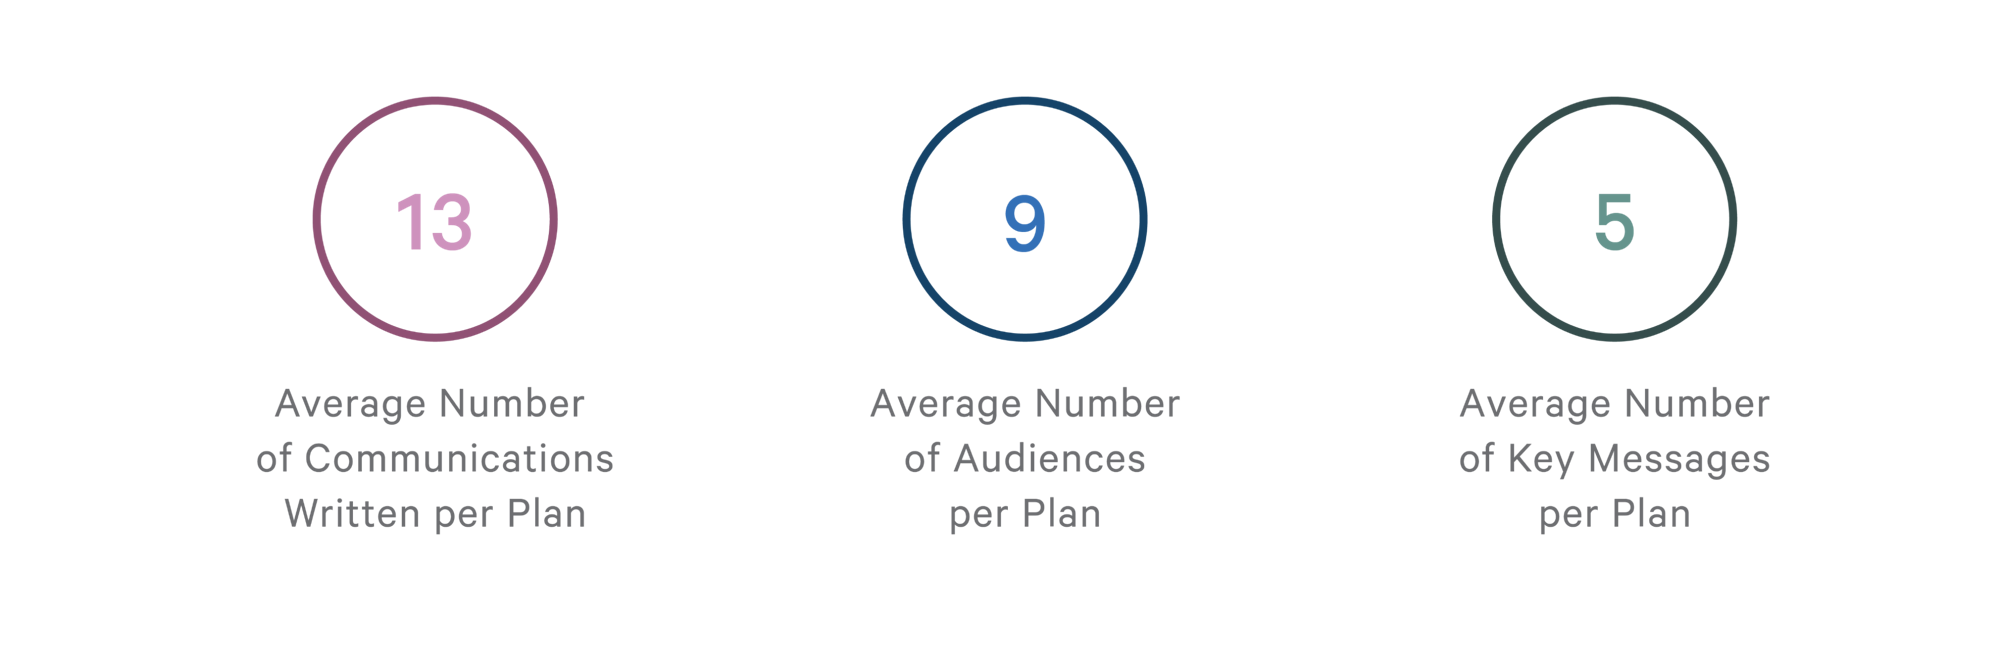 Stats: 13 - average number of communications written per plan, 9 - average number of audiences per plan, 5 - average number of key messages per plan